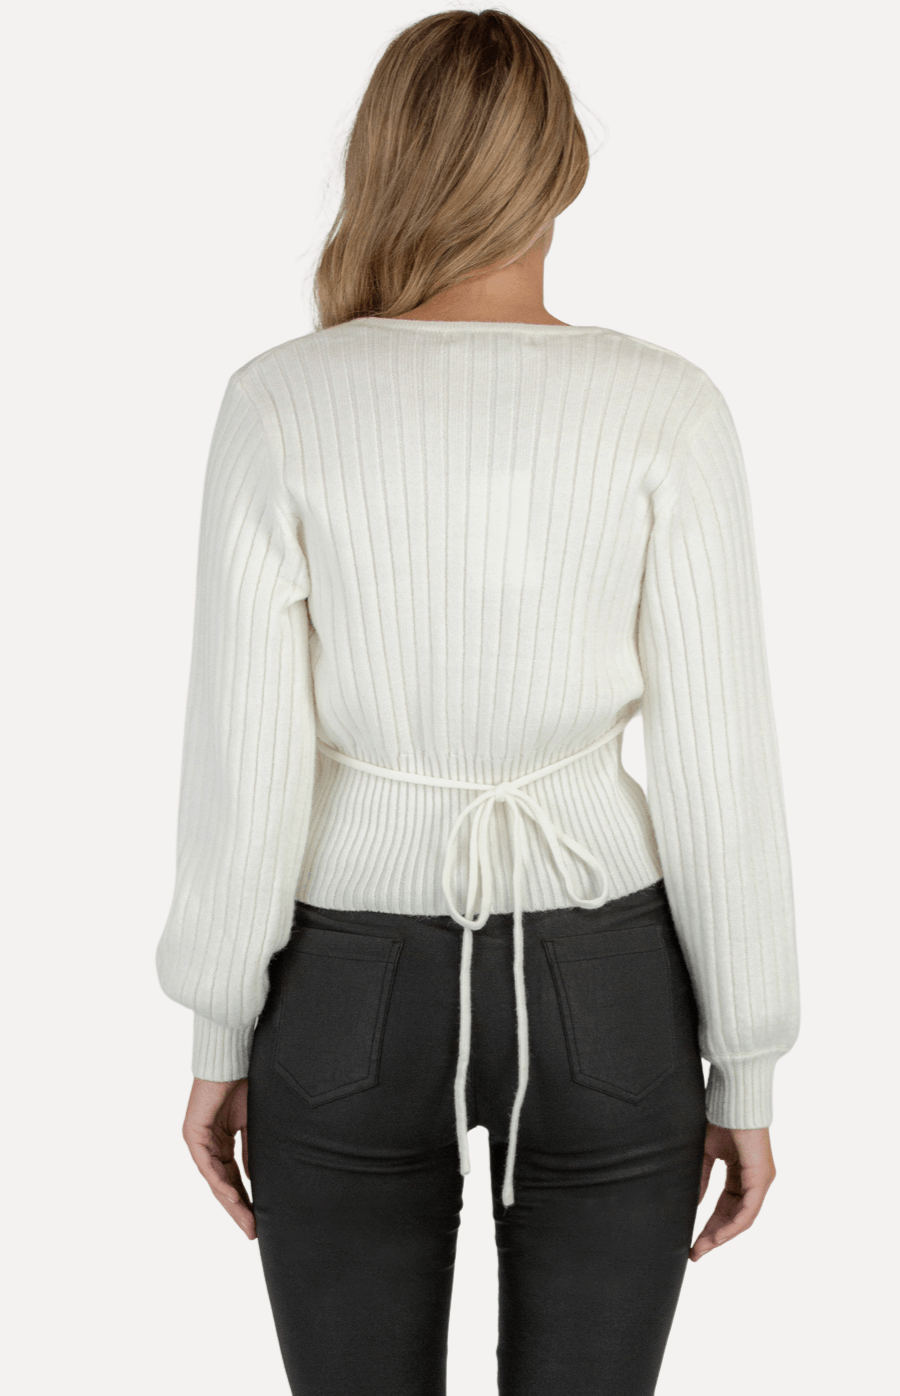 Andrea Knitted Top in White - Ophelia Fox Boutique